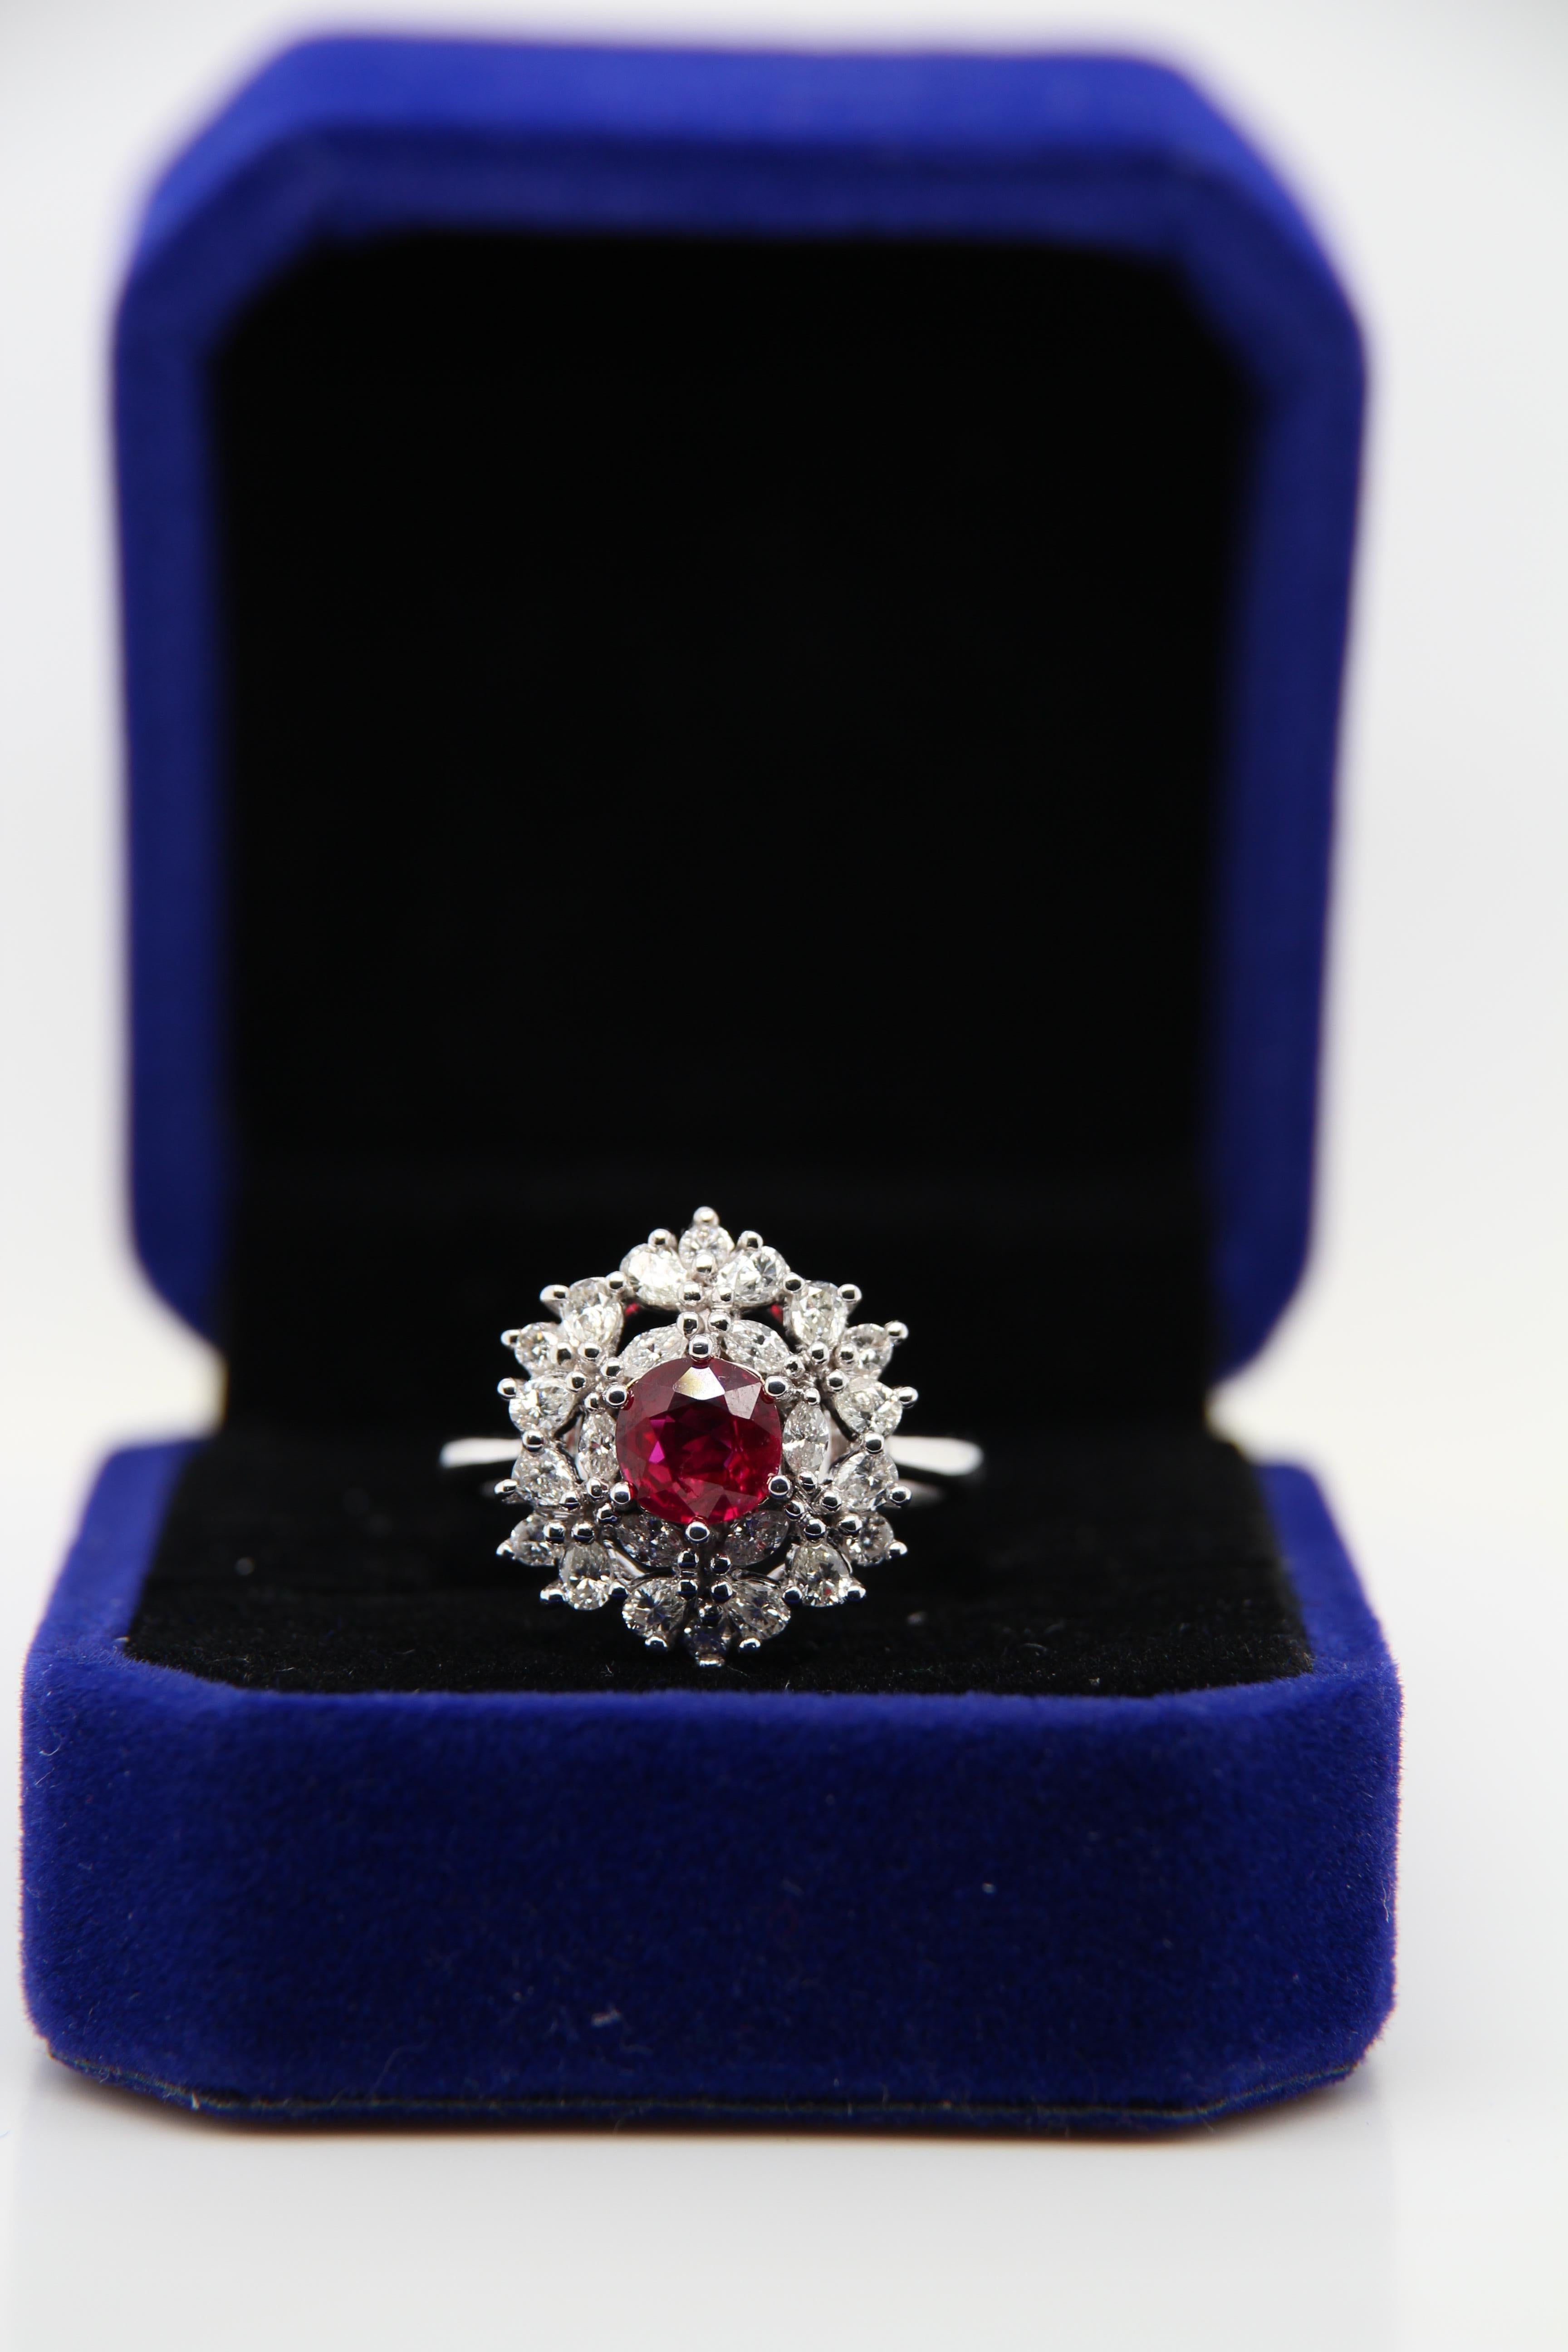 A Ruby and diamond ring. The ring's center stone is 1.08 carat pigeon blood Burmese ruby certified by Gem Research Swisslab (GRS). The center stone is surrounded by 0.95 carat mix shaped diamonds and mounted on 18K white gold gross weight 6.19 g.